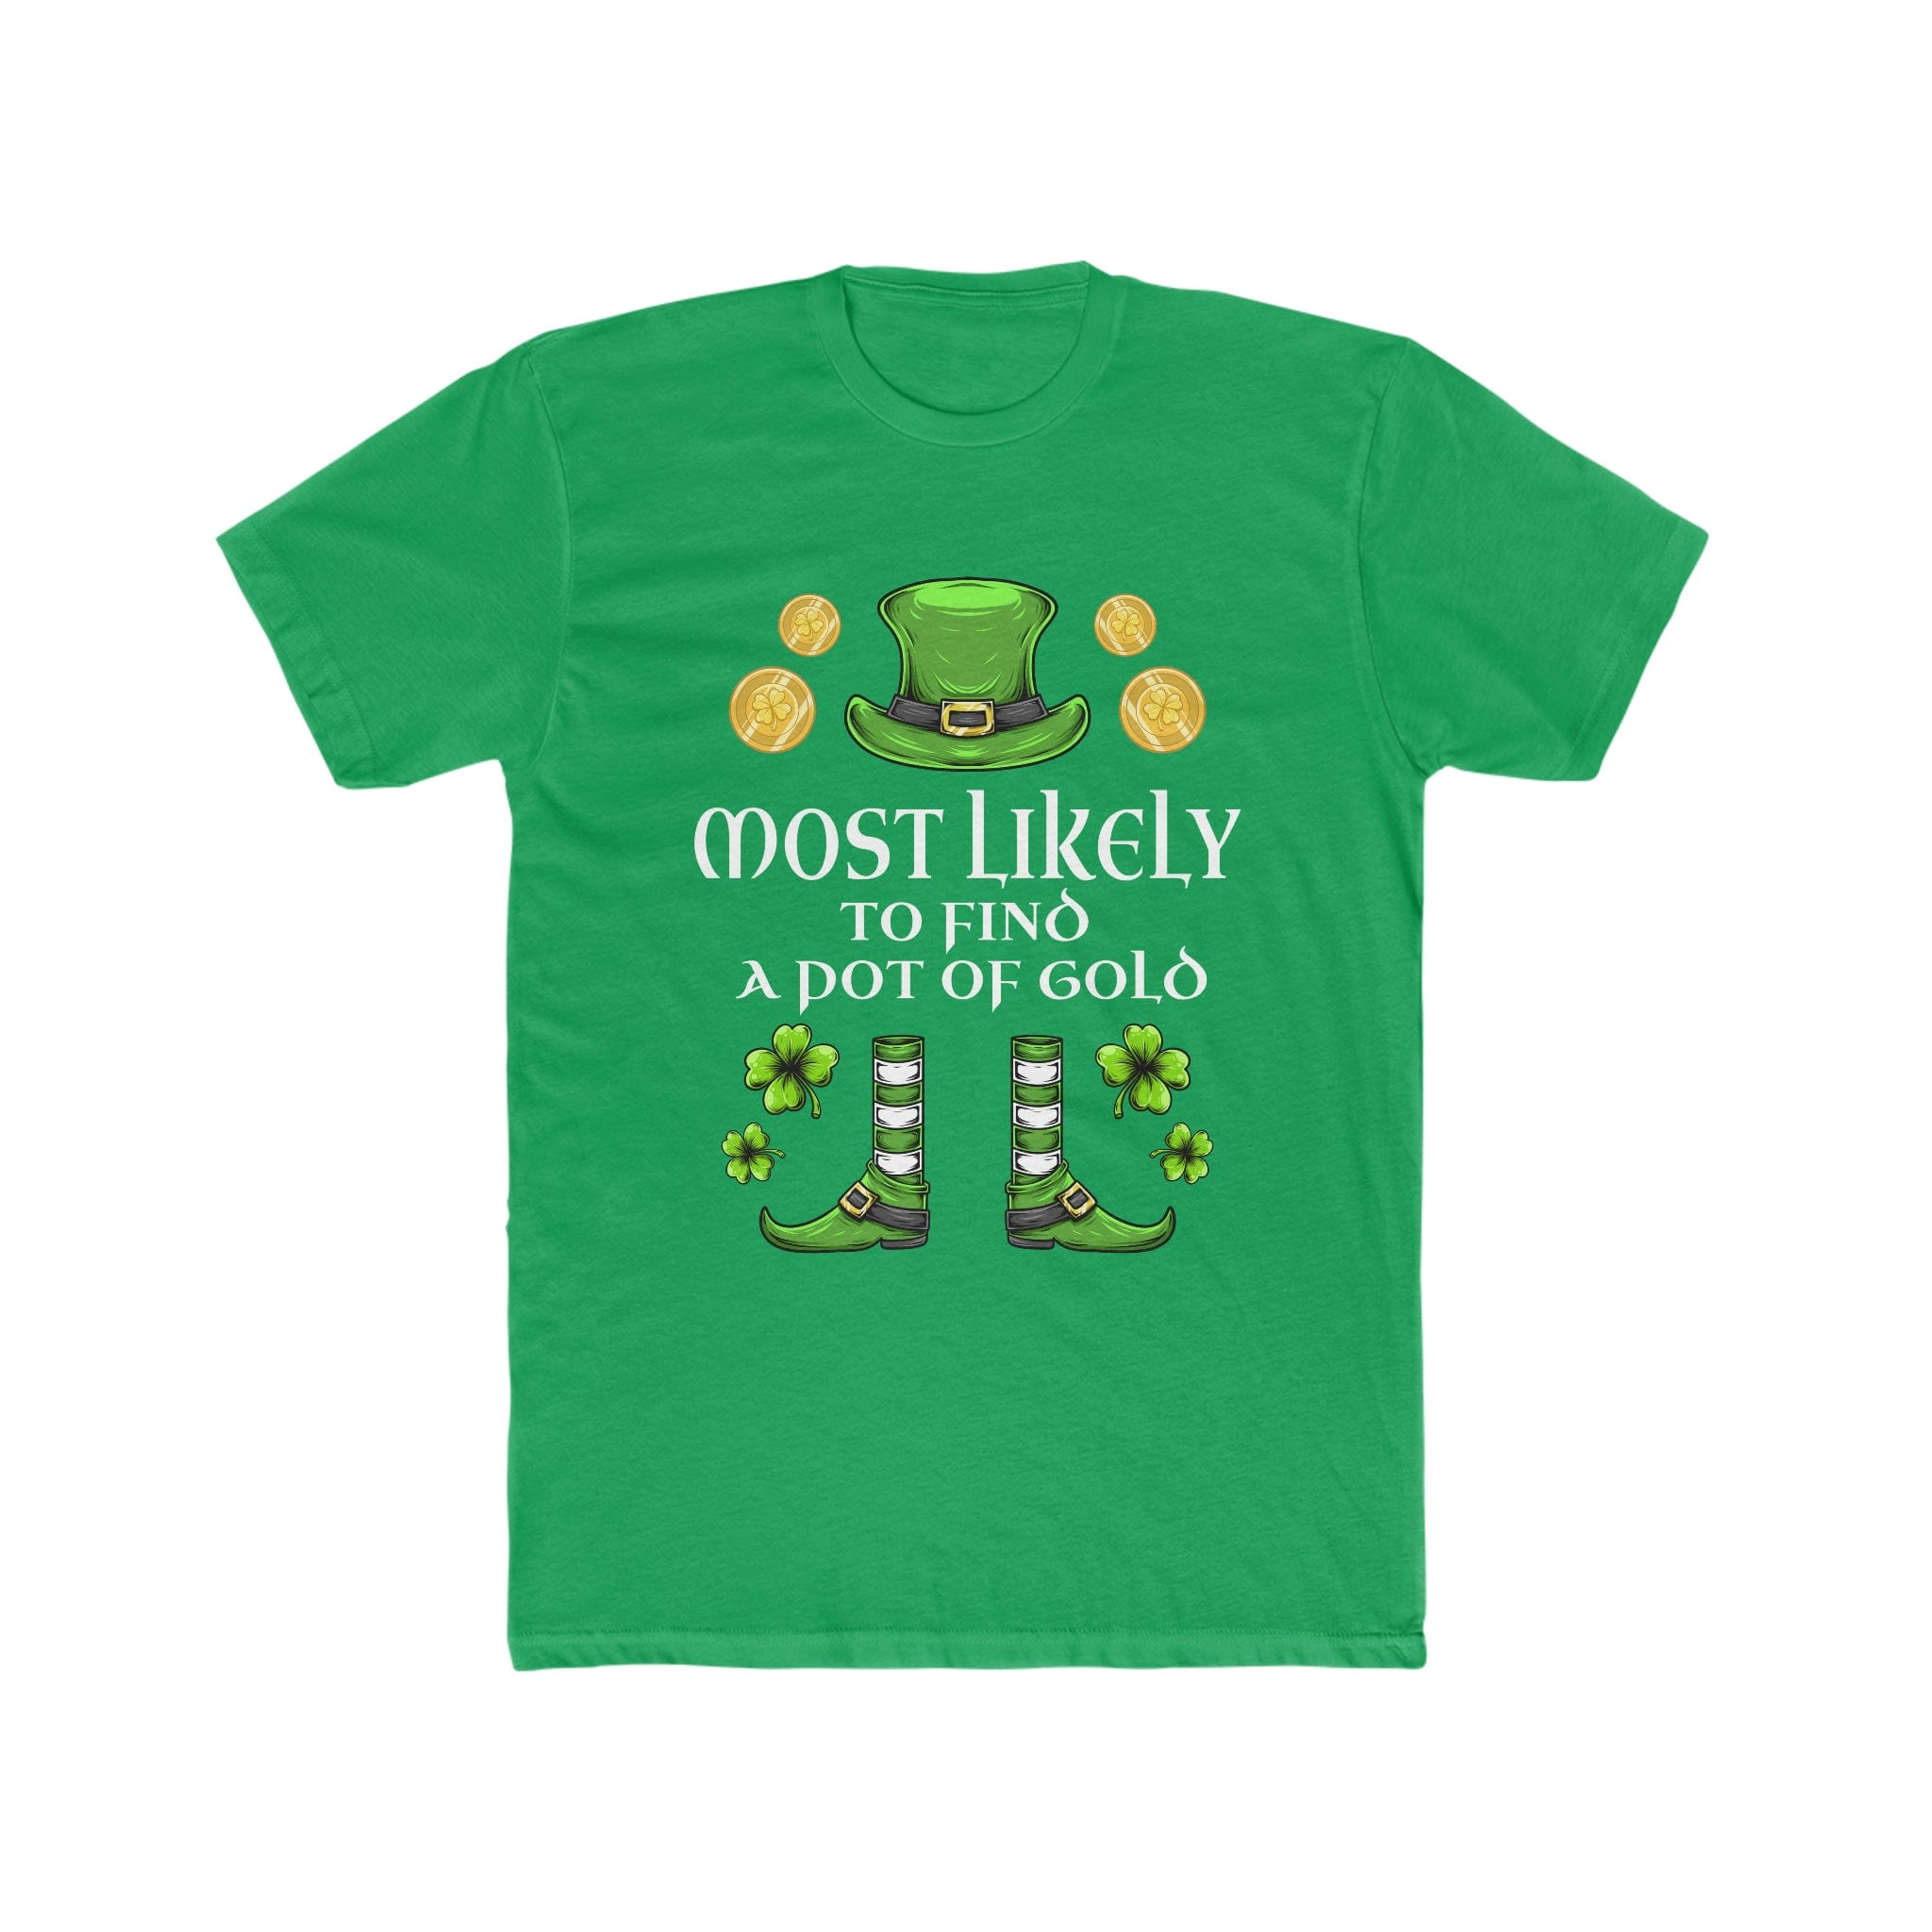 Most likely TO FIND  A POT OF GOLD Premium Unisex Shirt